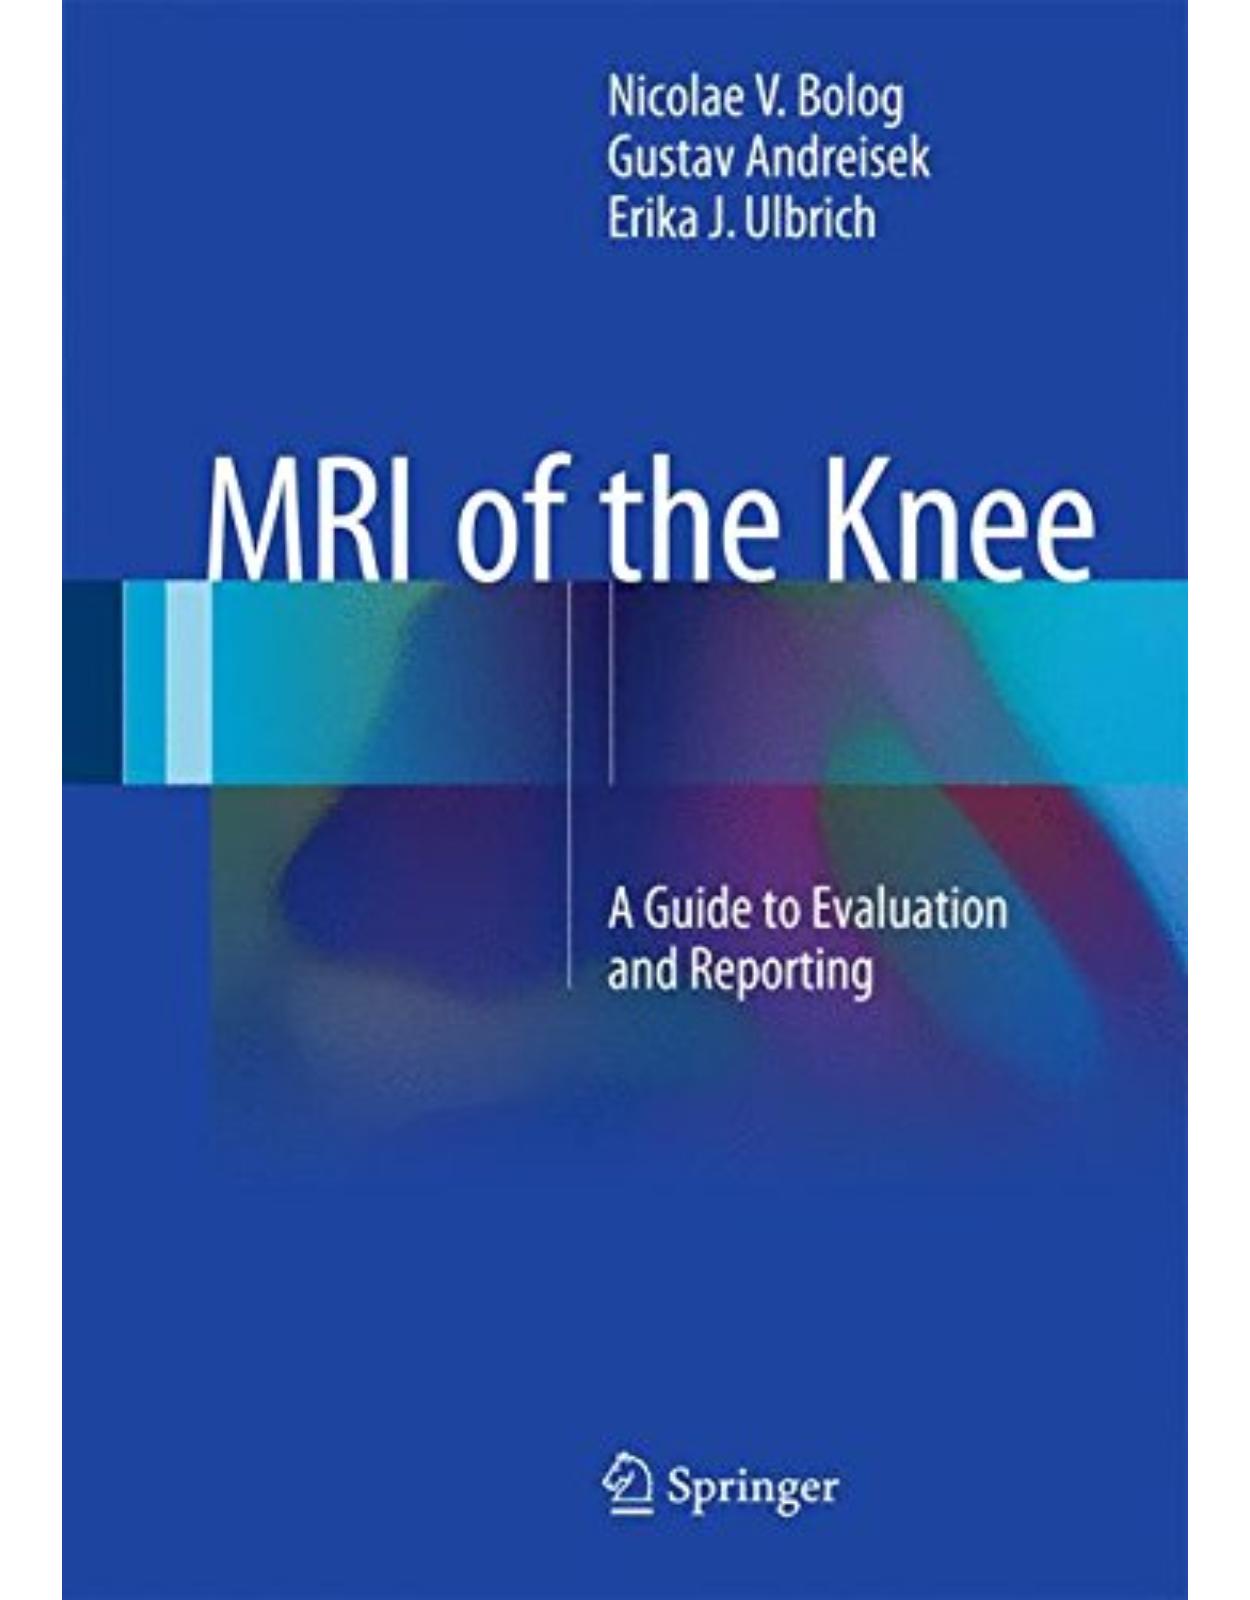 MRI of the Knee: A Guide to Evaluation and Reporting 